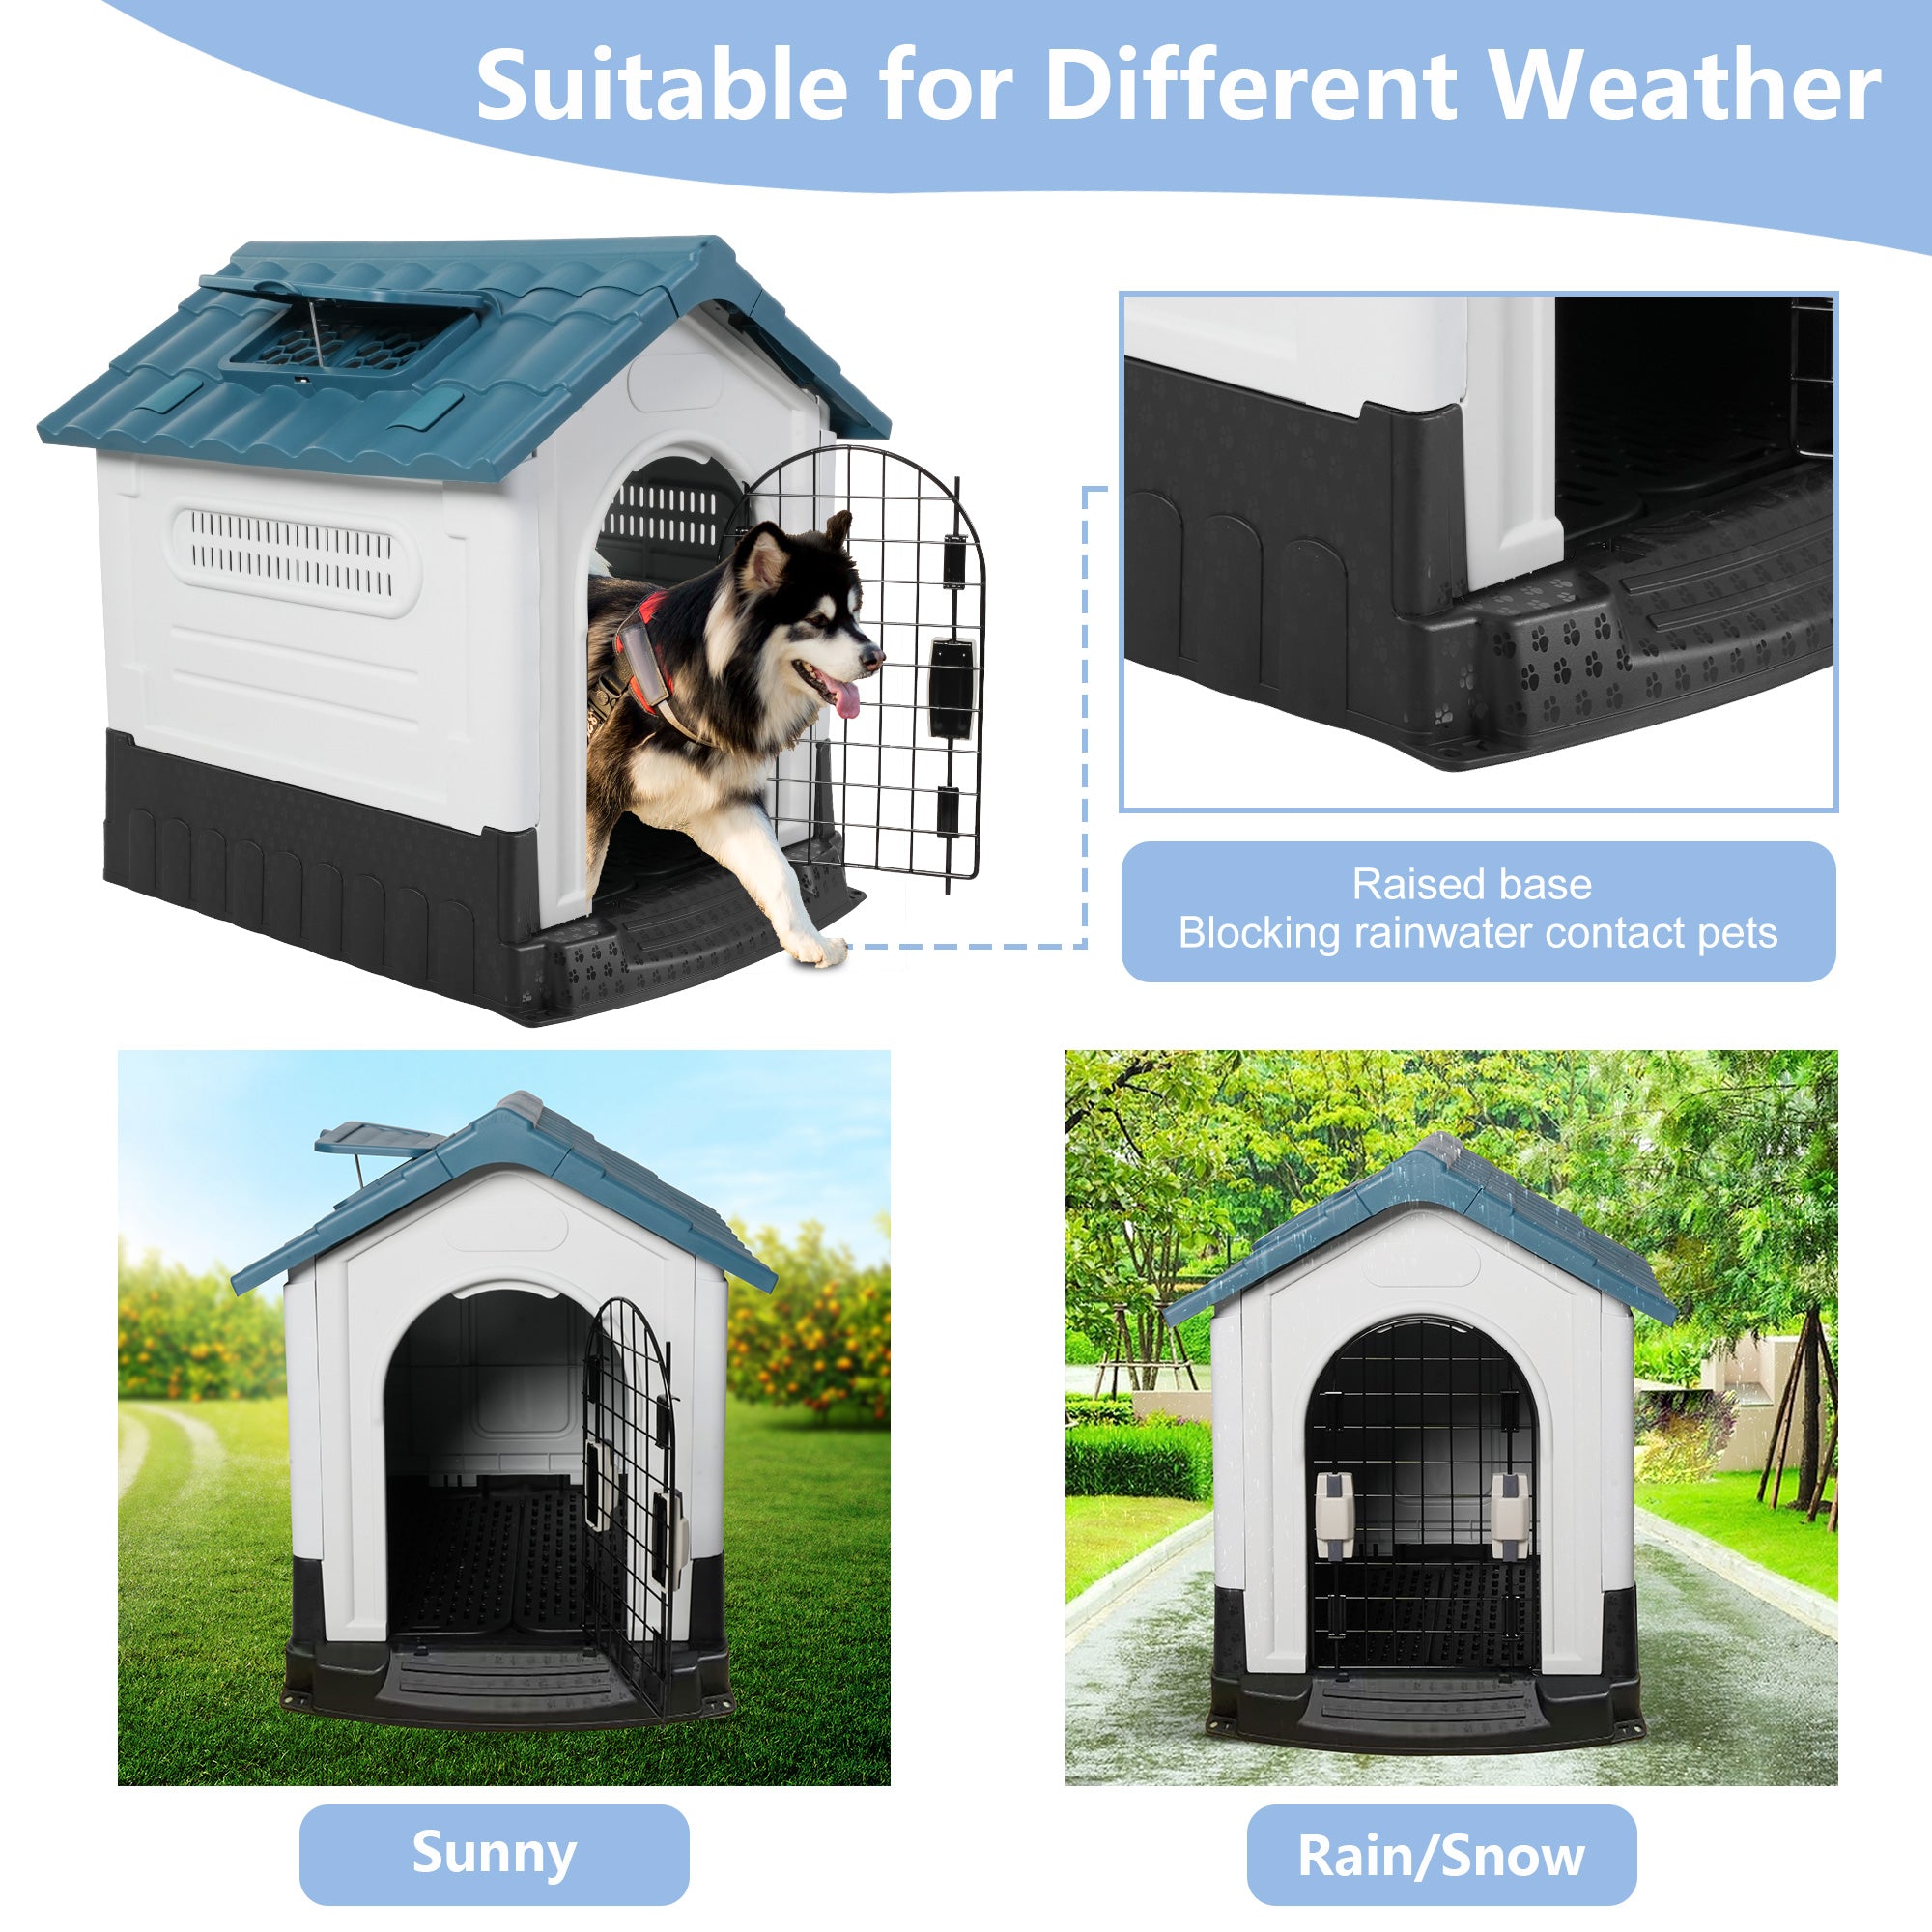 Outdoor Large Dog House Plastic Waterproof Kennel with Air Vents, 42.9"L x 40.5"W x 46.4"H, Blue Roof